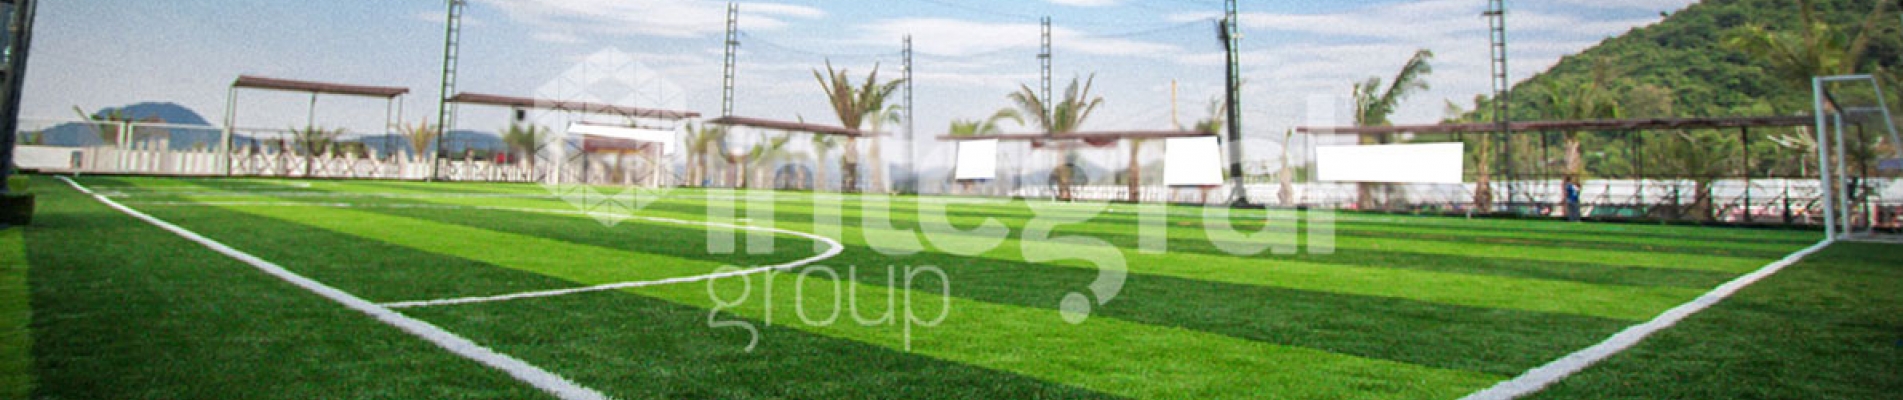 How to Produce Artificial Grass